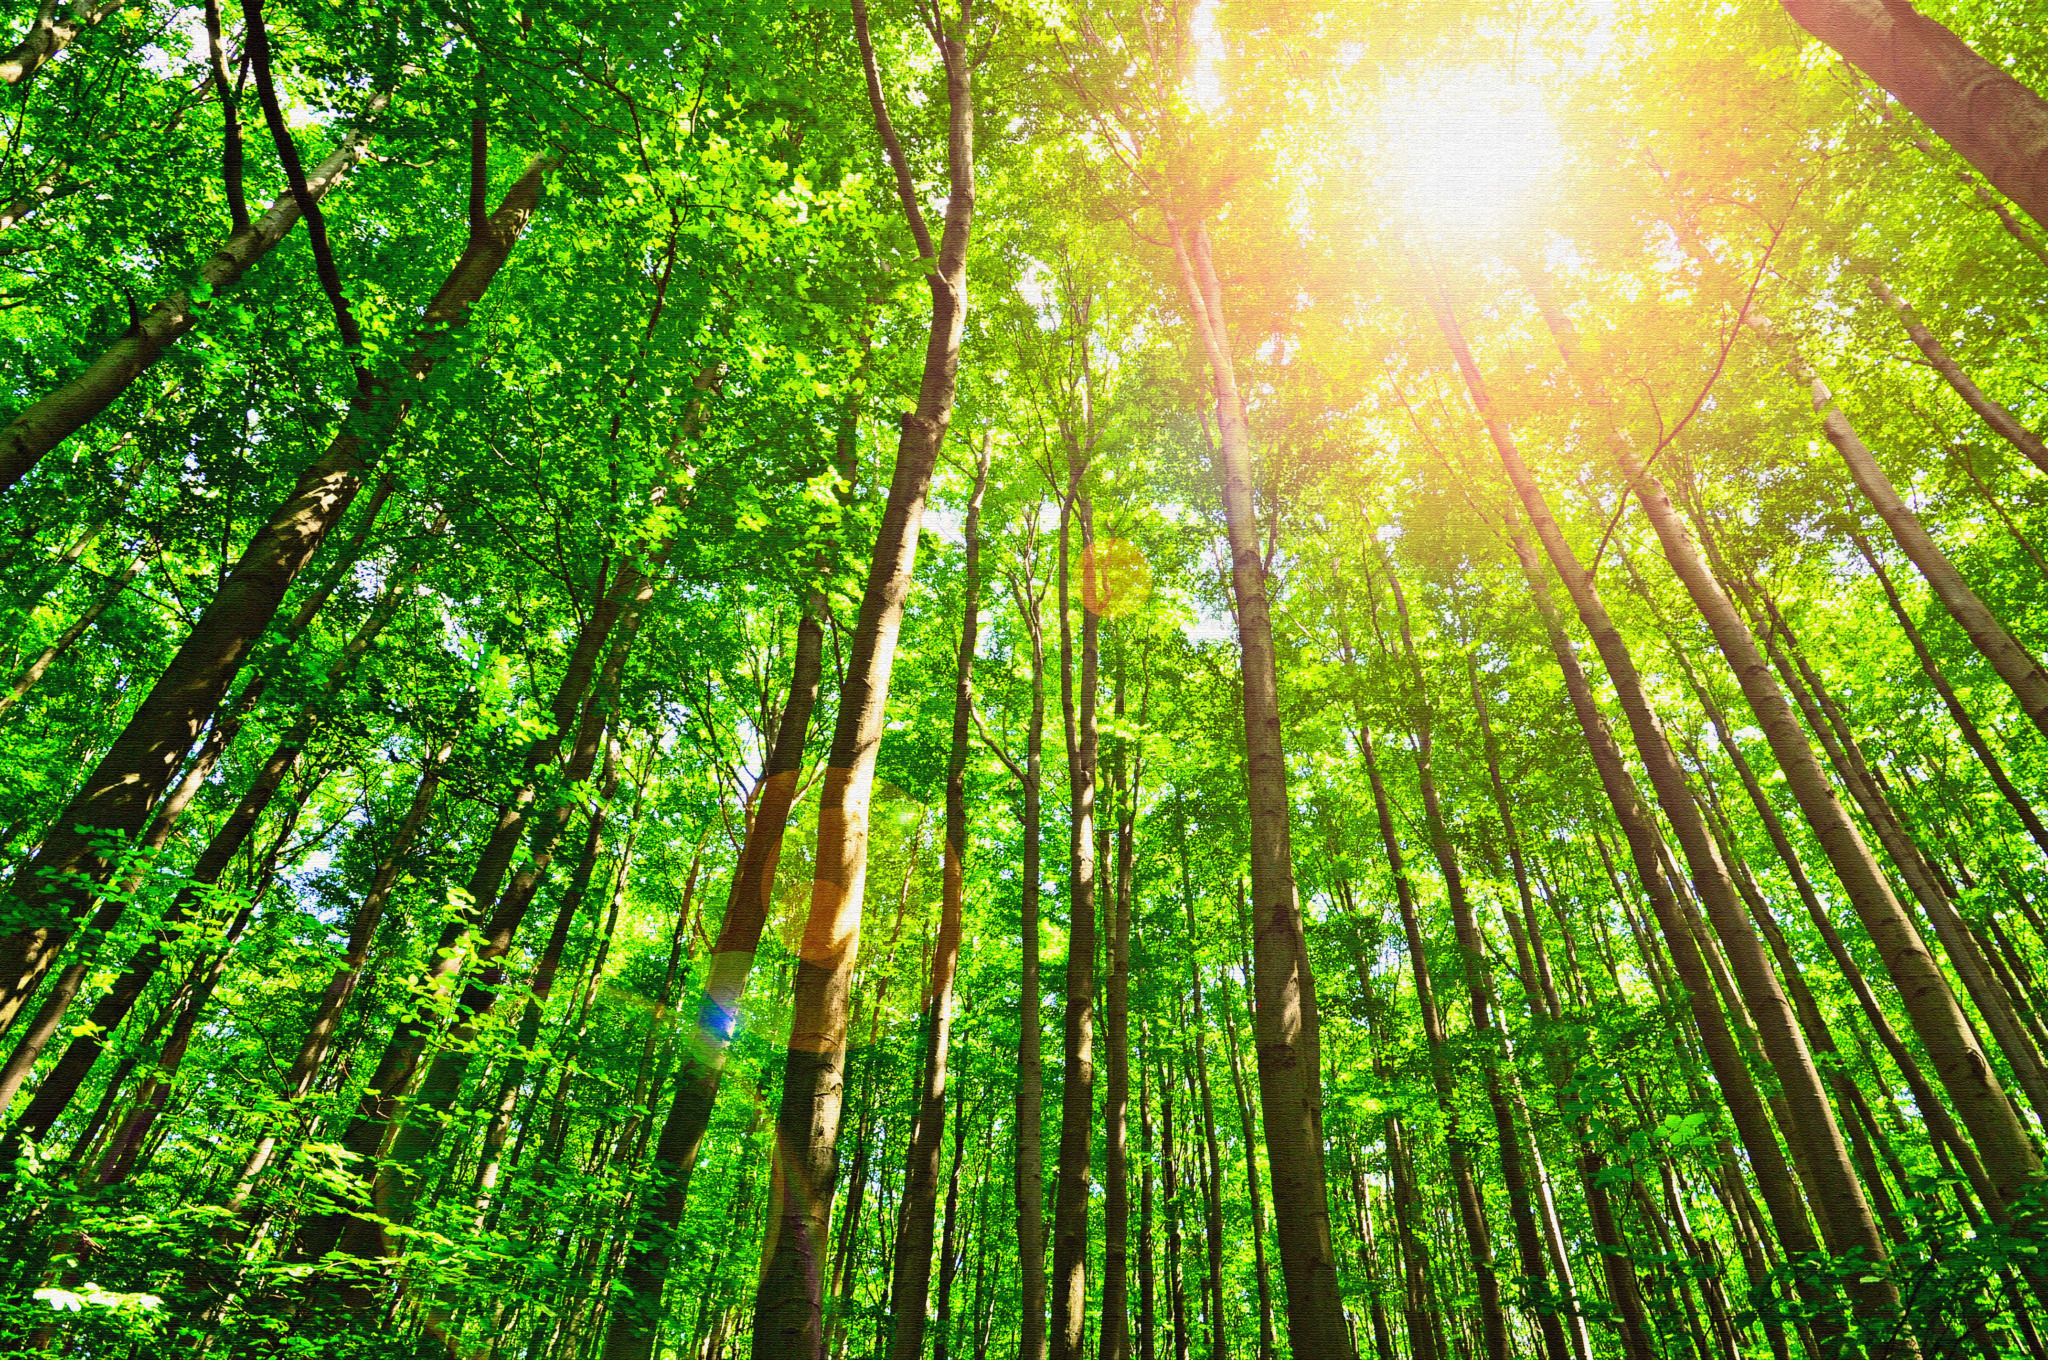 Green,Forest,Tree,Foliage,In,Summer,Sun,Glowing,Through,Leaves,